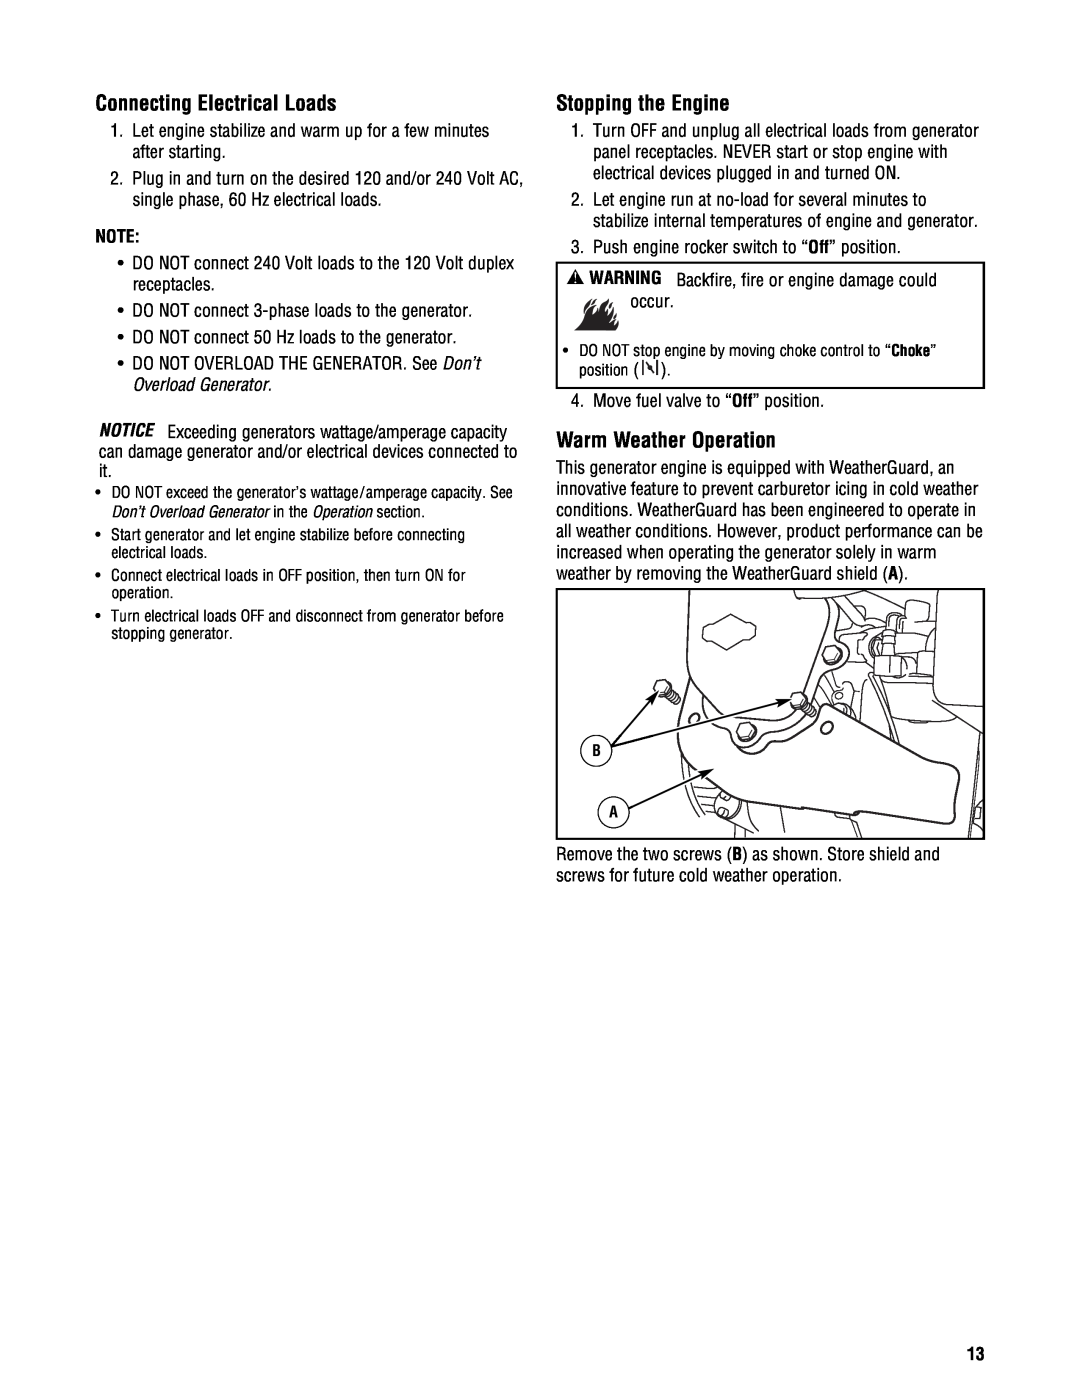 Briggs & Stratton 209443gs manual Connecting Electrical Loads, Stopping the Engine, Warm Weather Operation 